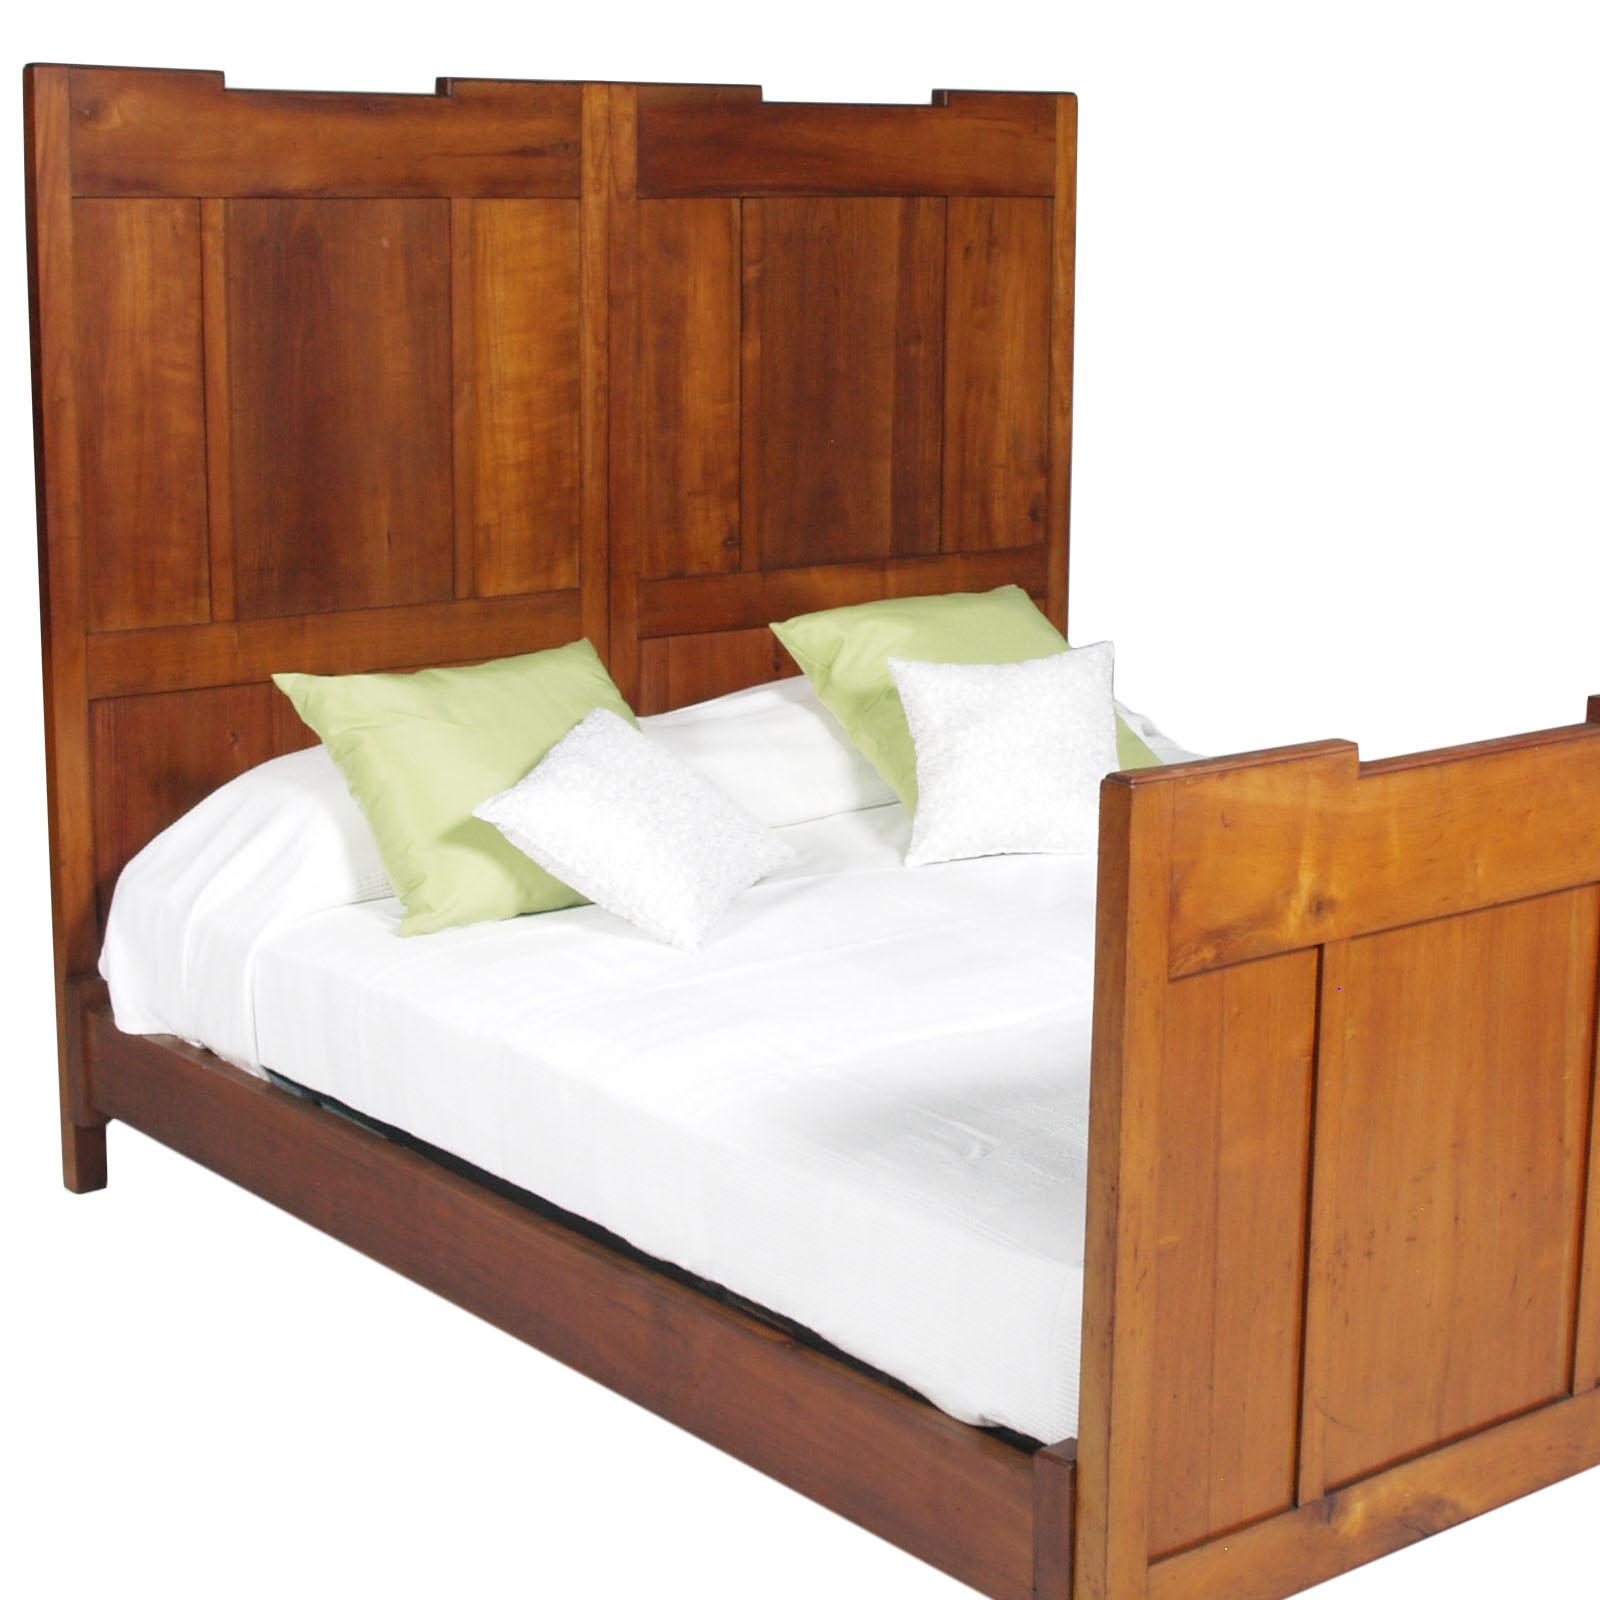 Solid 1920s country antique Italian Art Deco twin beds, Pair of beds, double bed in cherrywood, polished to wax

Measures cm: H 155/93 W 182/91 D 200.

         